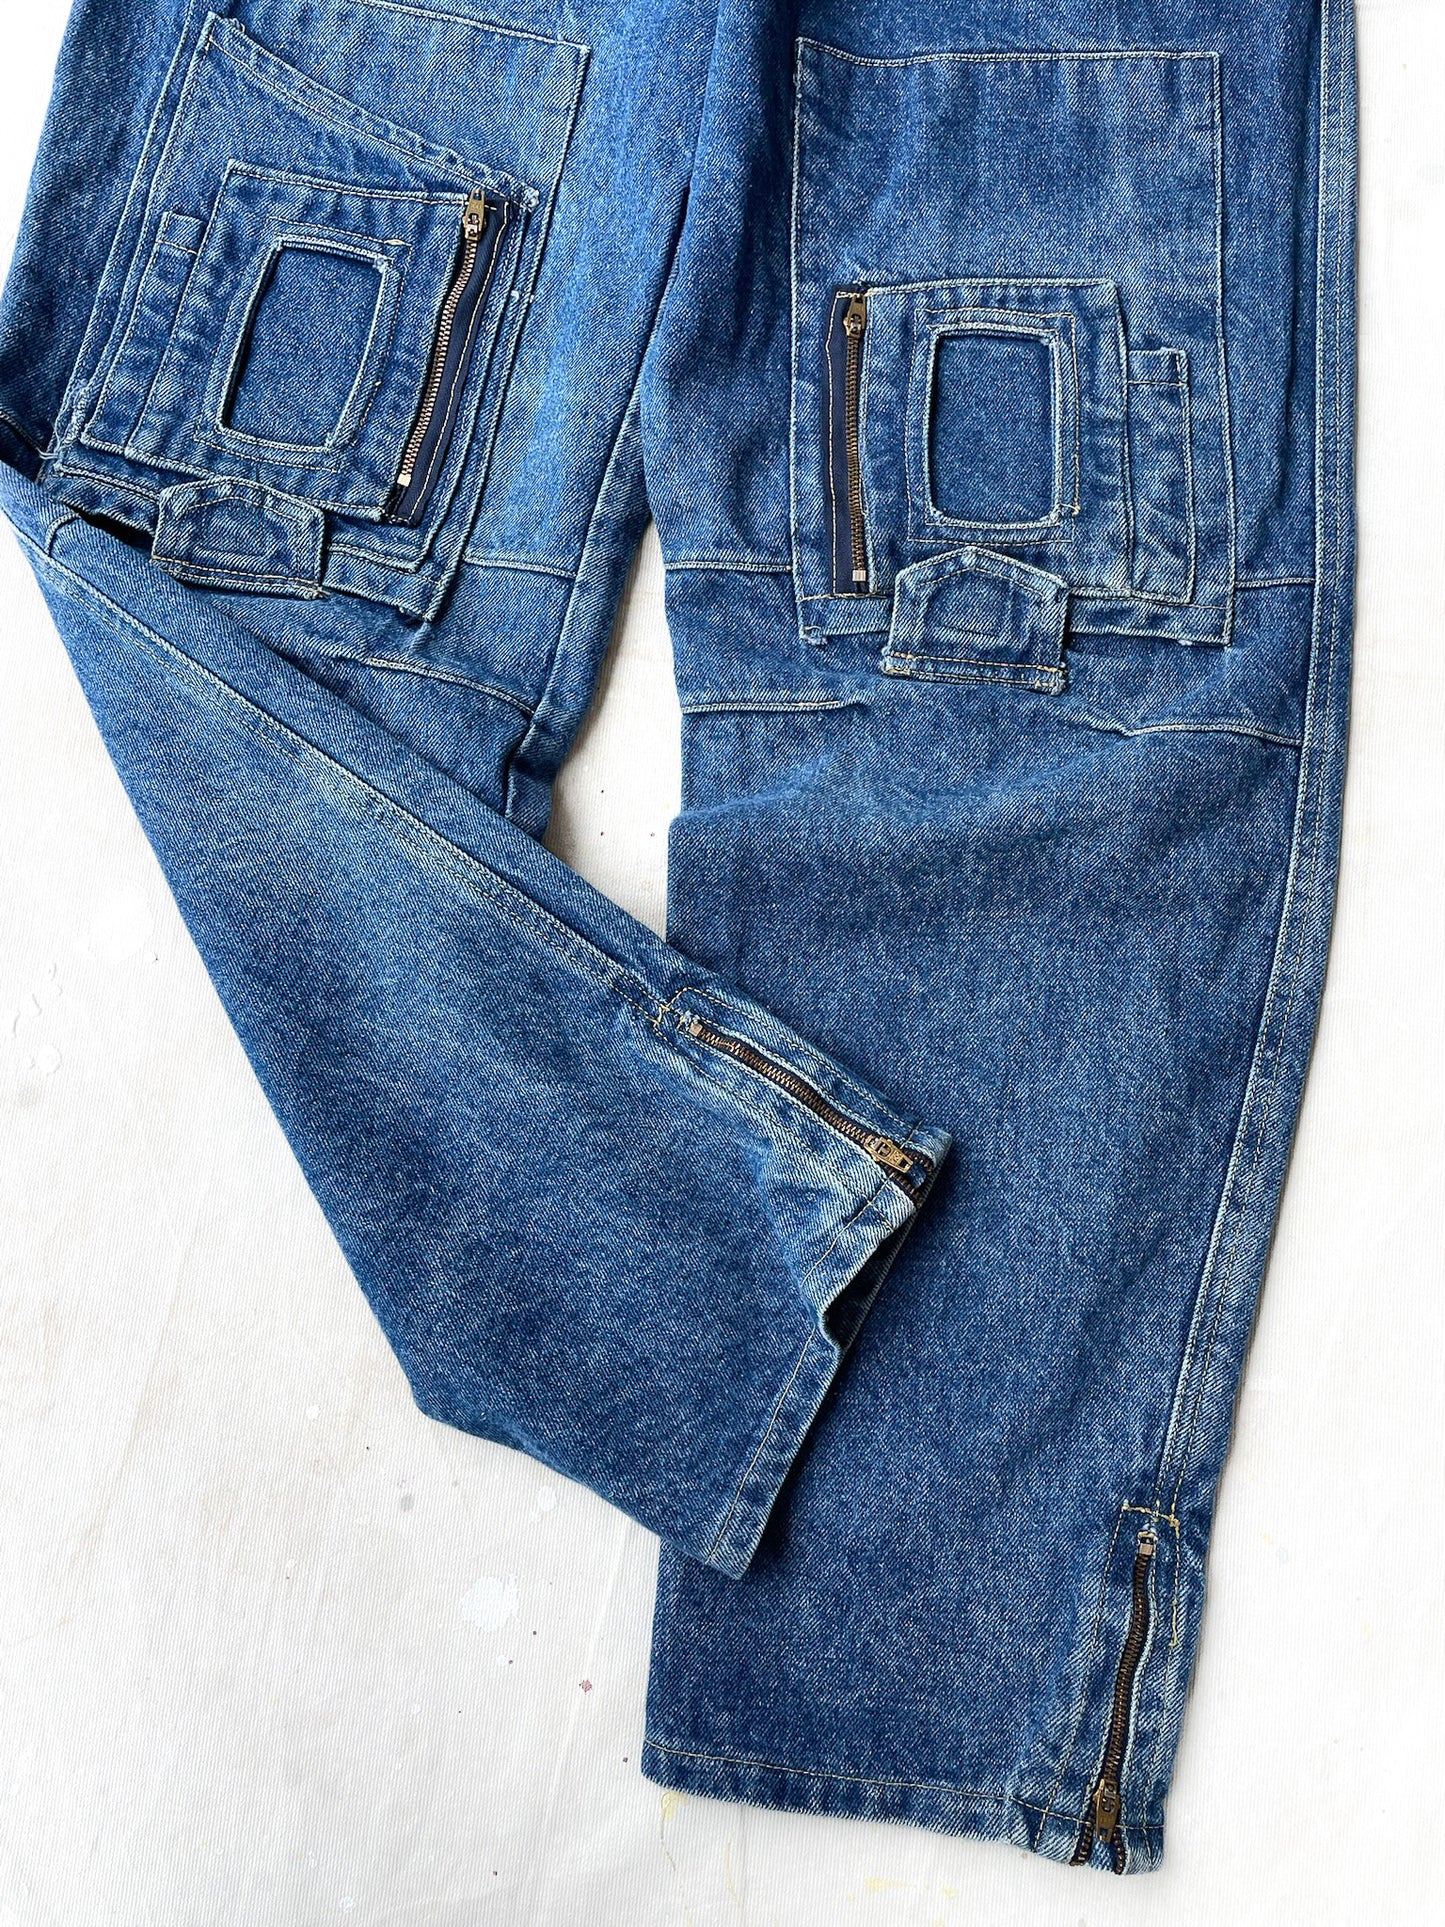 80's Guess Multi Pocket Jeans—[33x31]